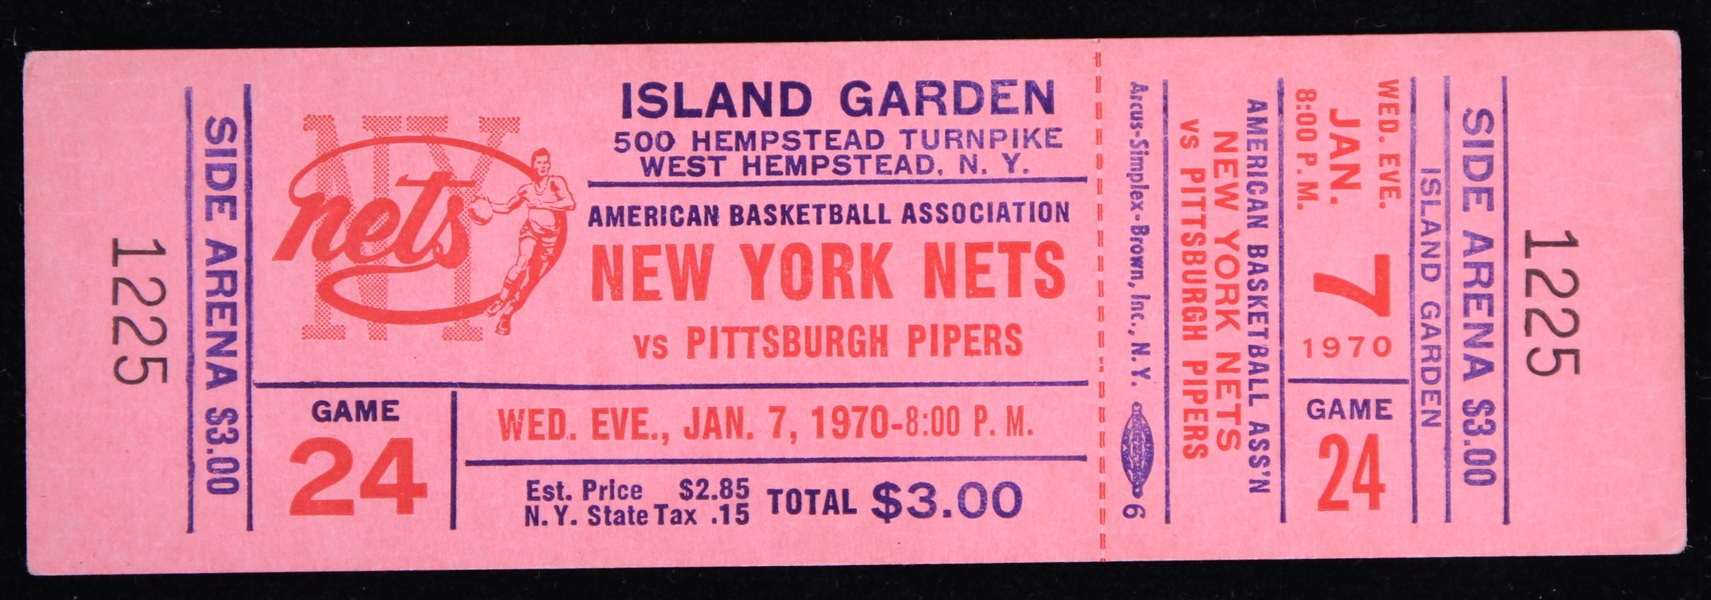 1970 New York Nets Pittsburgh Pipers Island Garden ABA Full Ticket